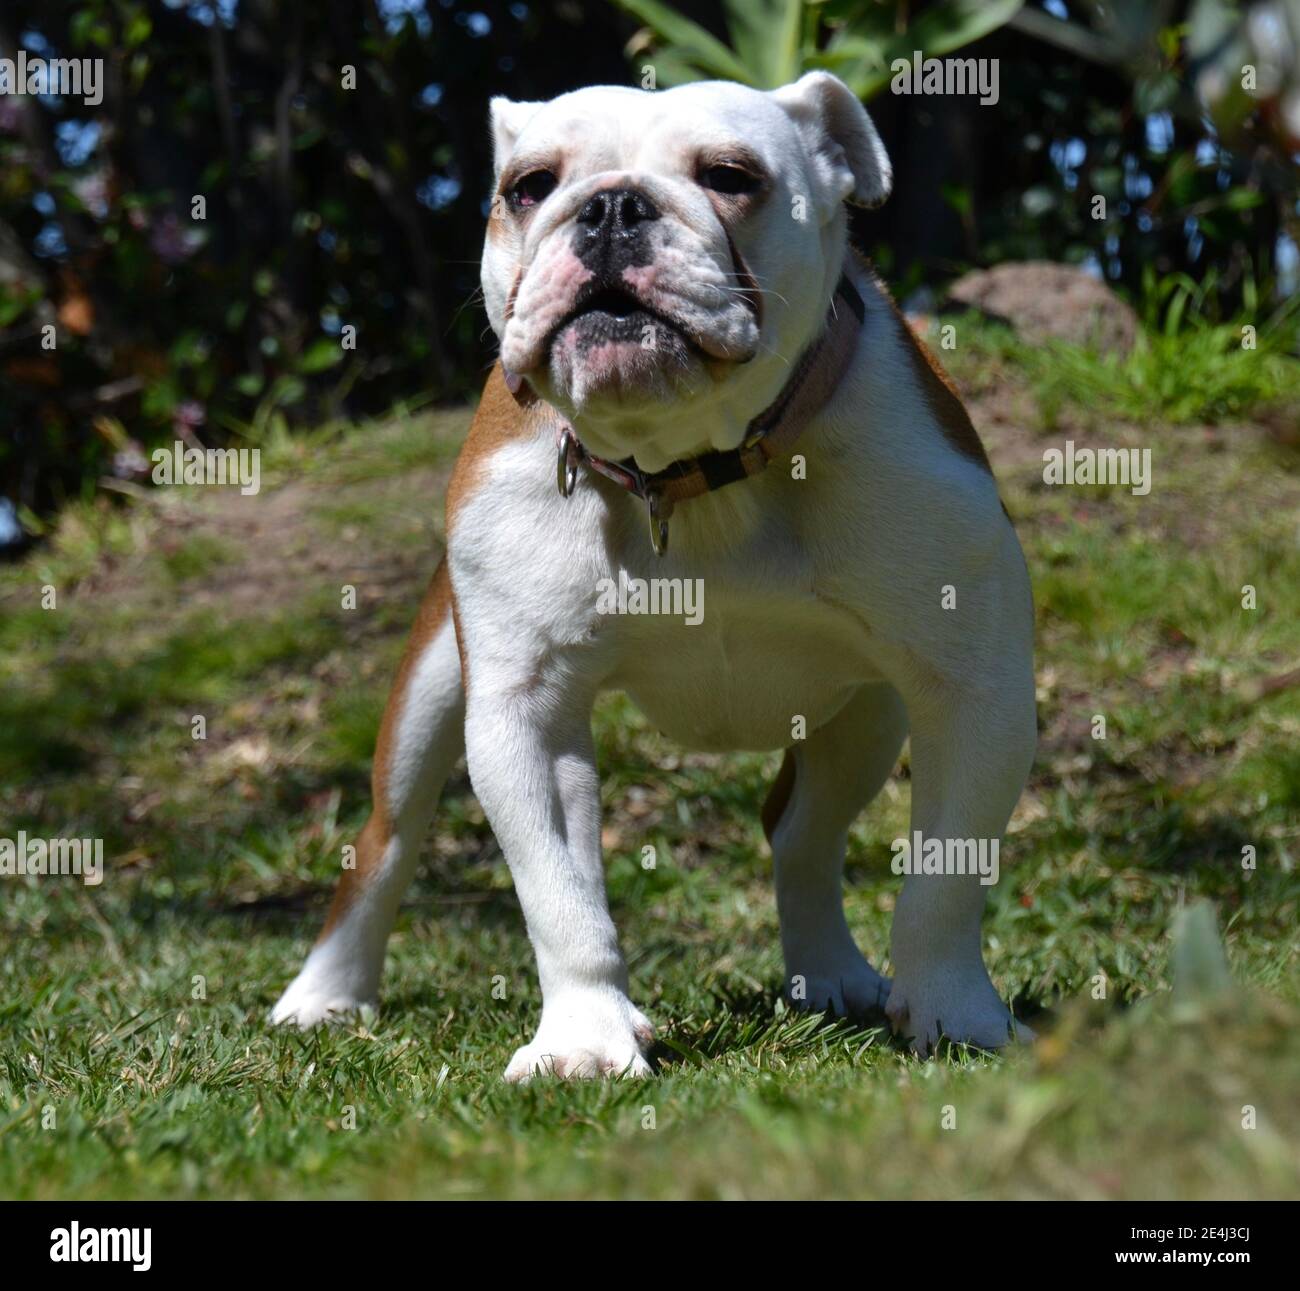 Young white and brown British or English bulldog puppy standing in aggressive posture in a garden setting about to bark Stock Photo